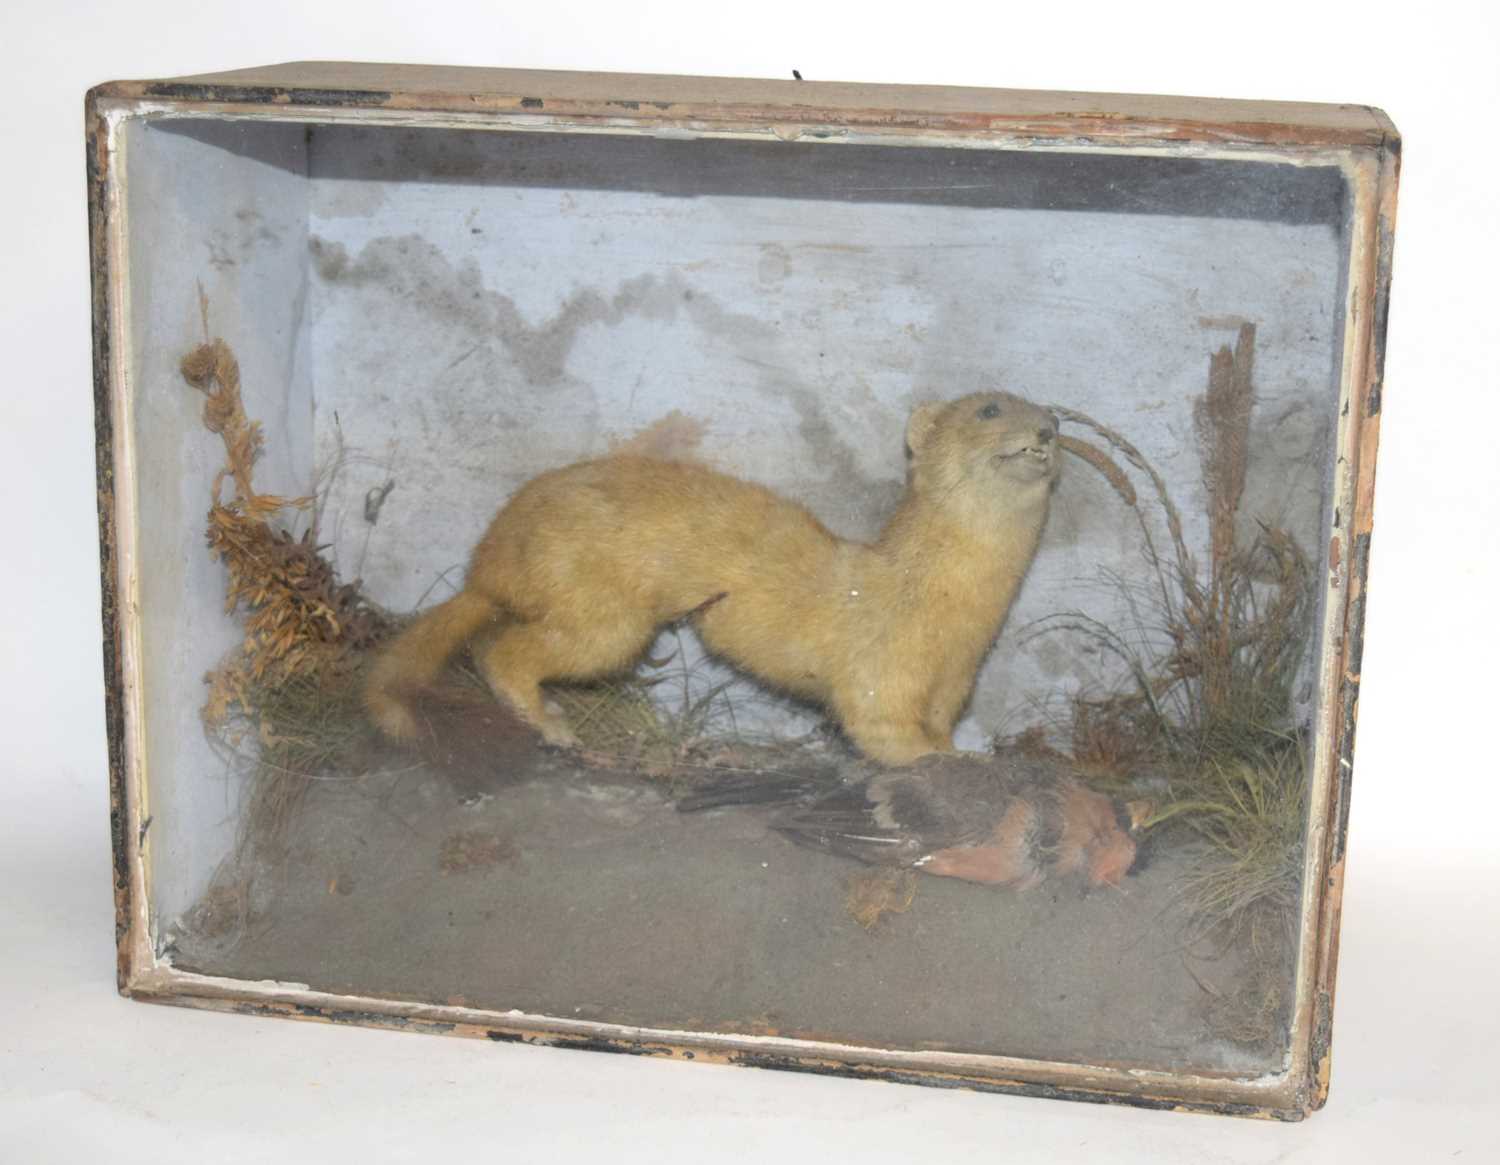 A Victorian taxidermy cased diorama of a Eurasian Stoat (Mustela erminea) set amongst grasses in